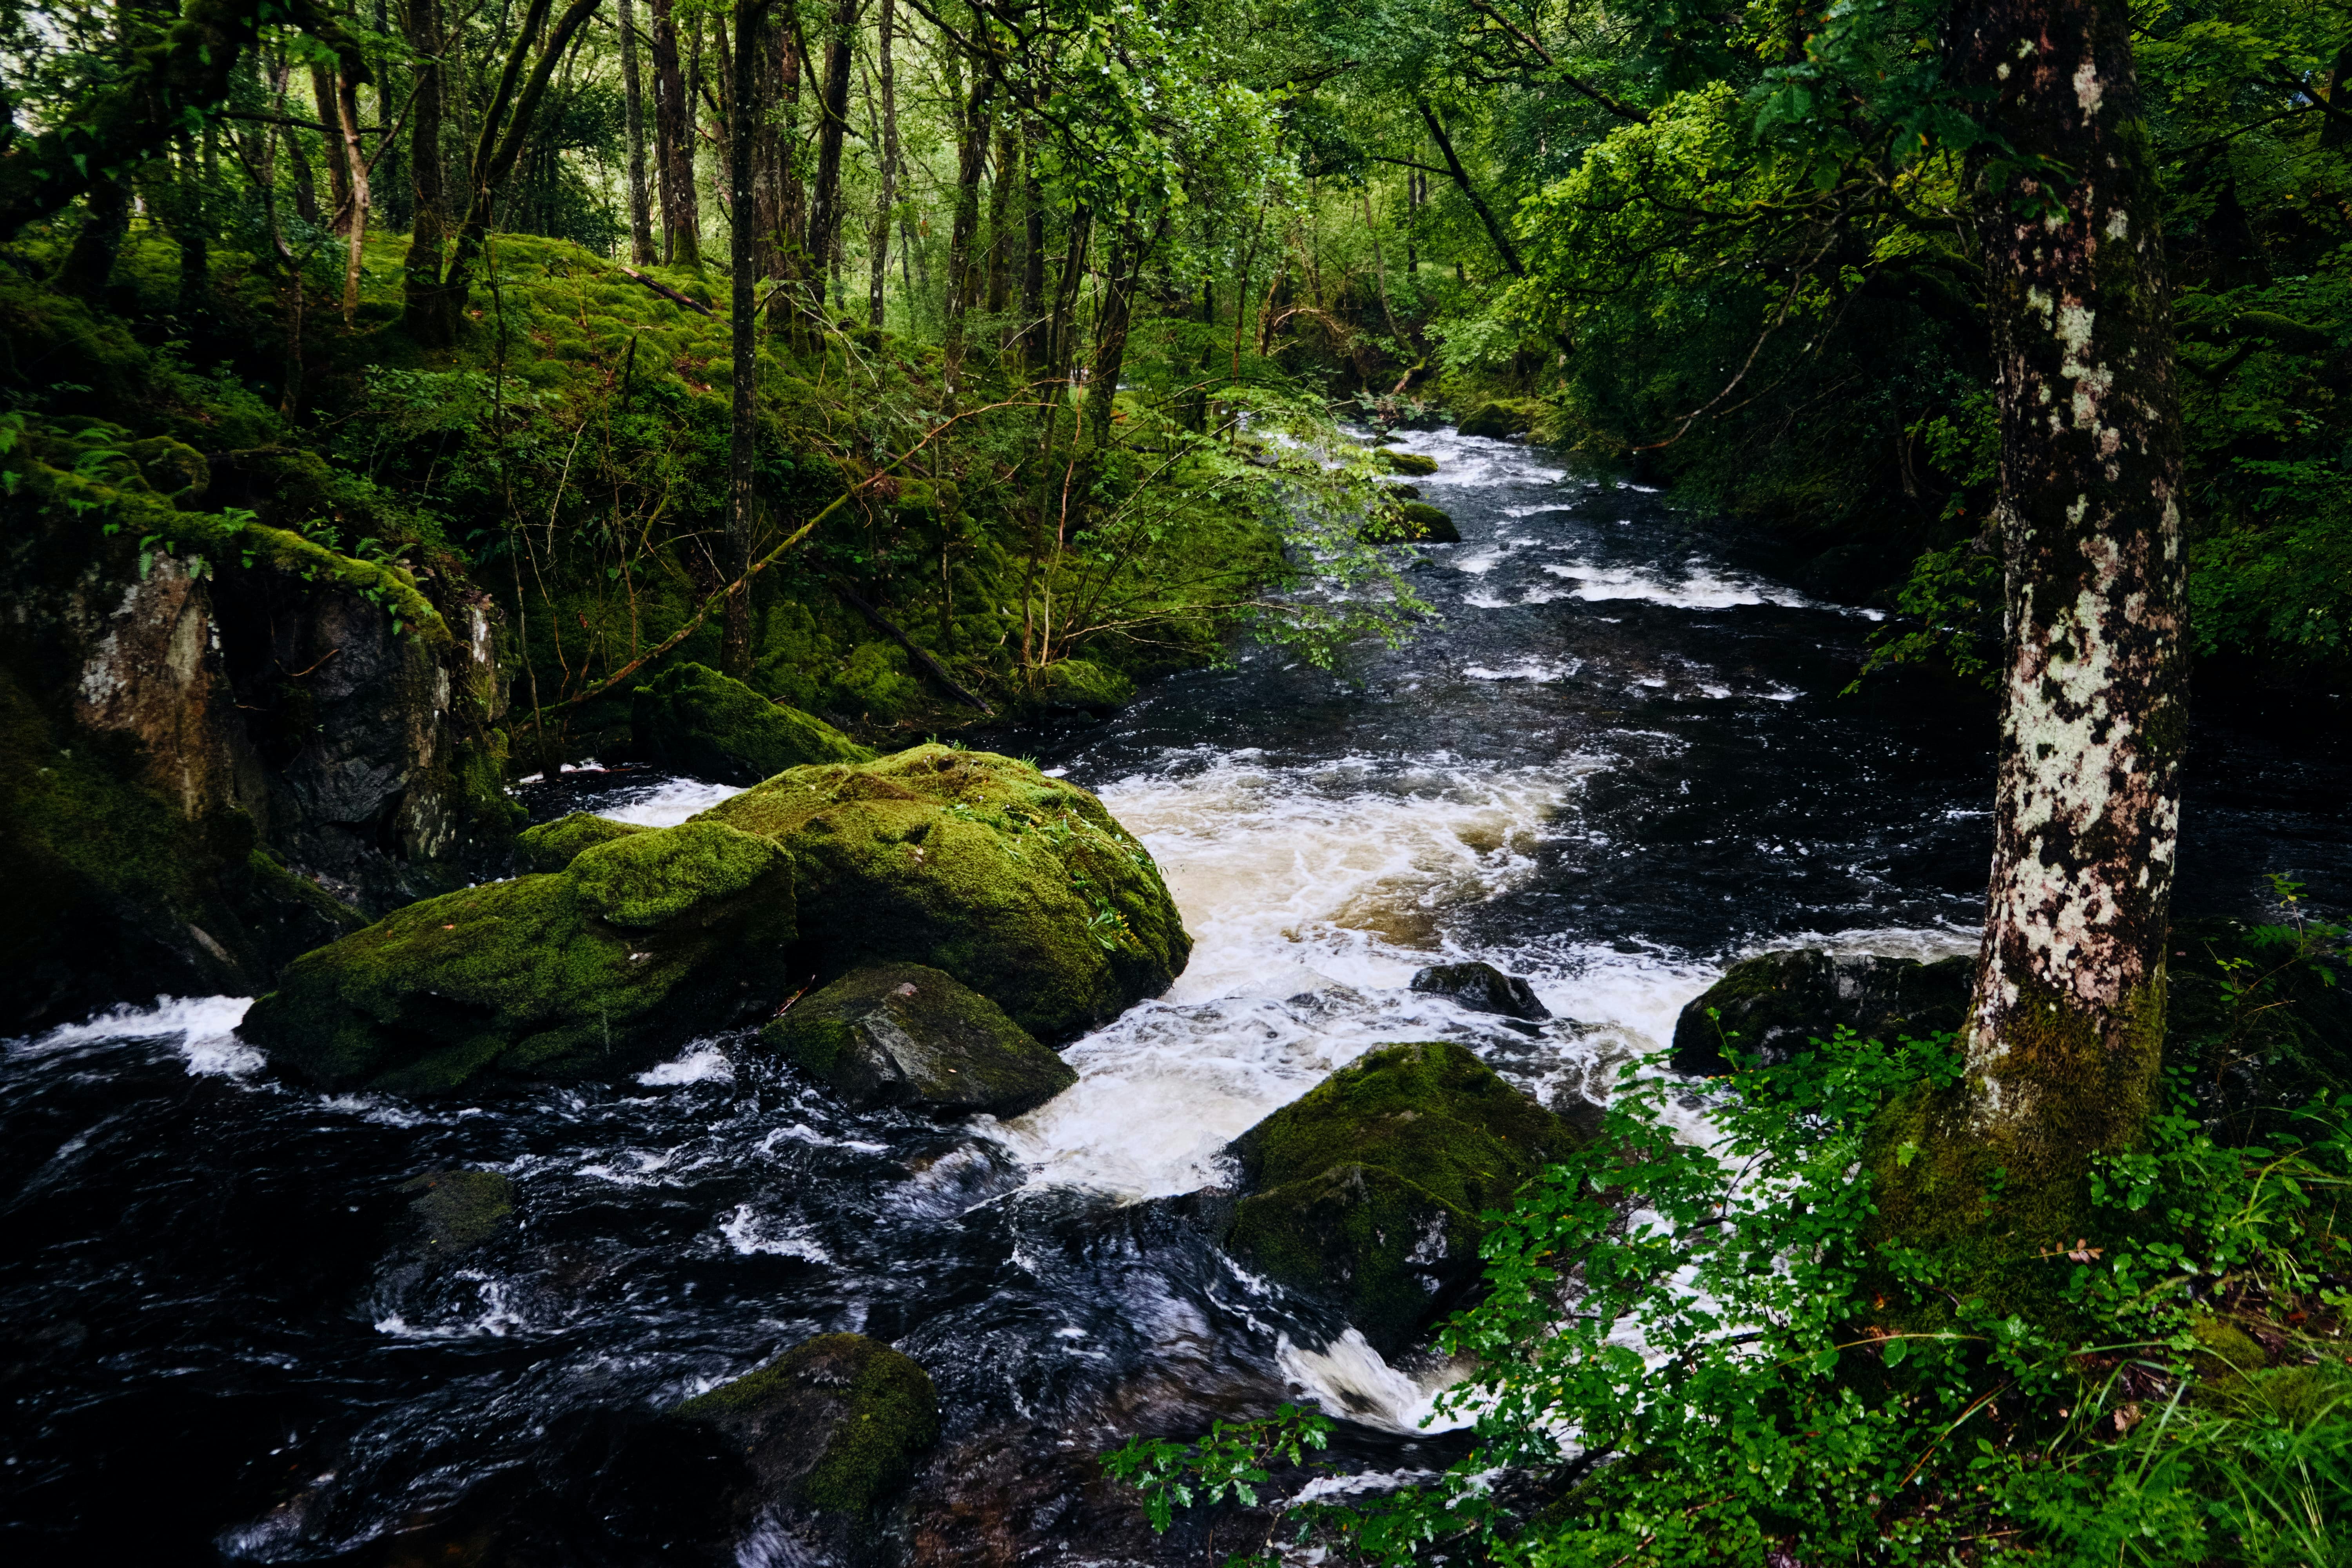 Everything was looking particularly lush in the rain whilst heading up to Colwith Force.